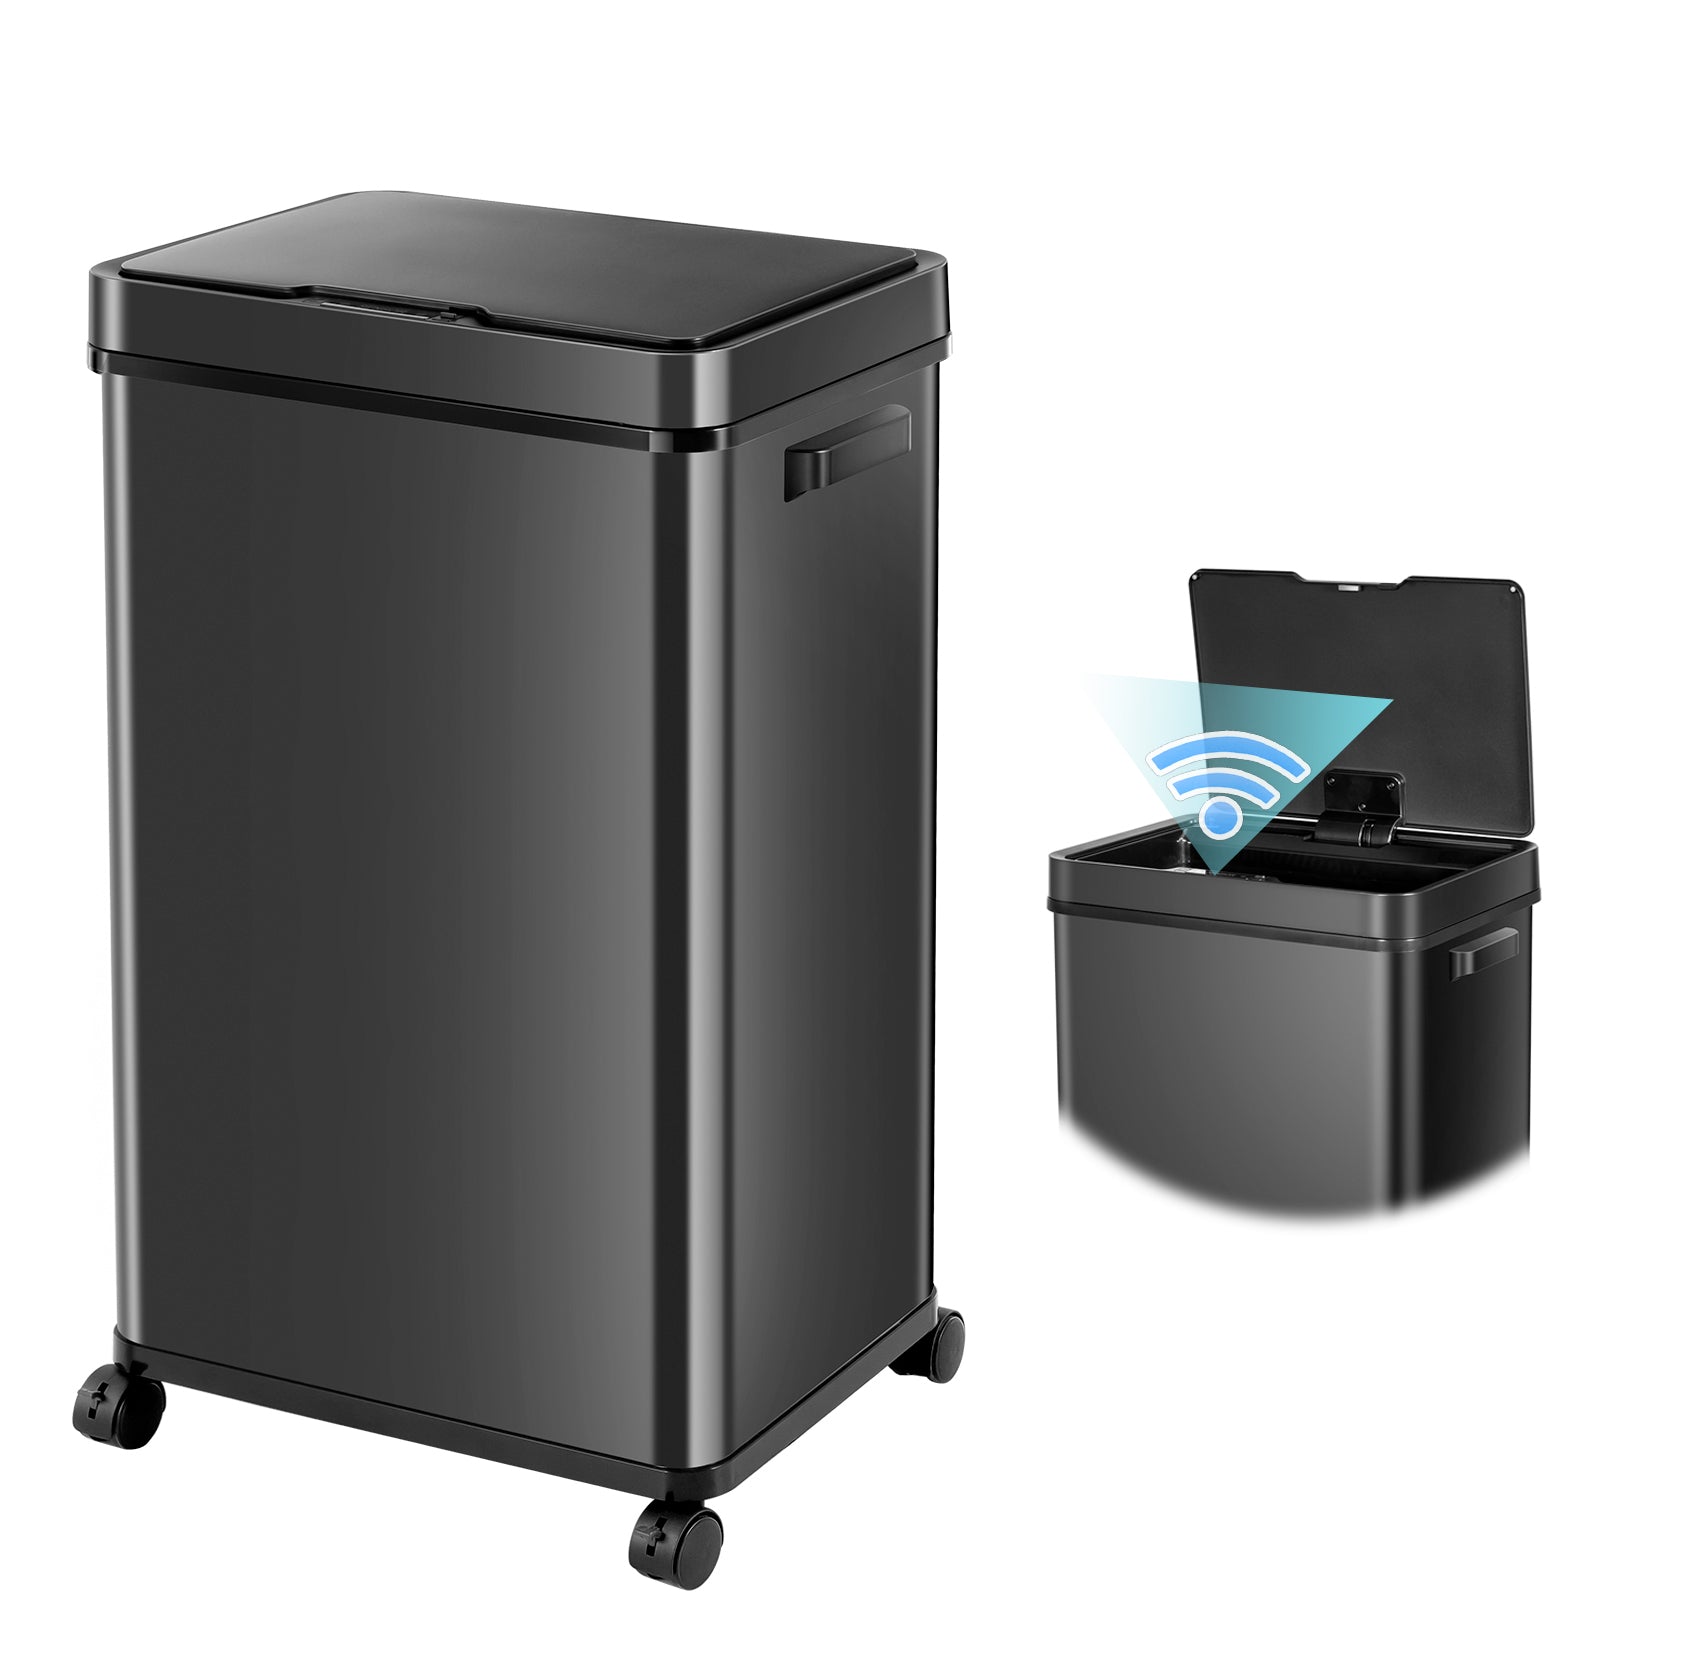 CozyBlock 18 Gallon Automatic Trash Can, Black Steel Touchless Motion Sensor Bin, Wide Opening Soft Close Lid, 68L, Large Capacity Slim Design